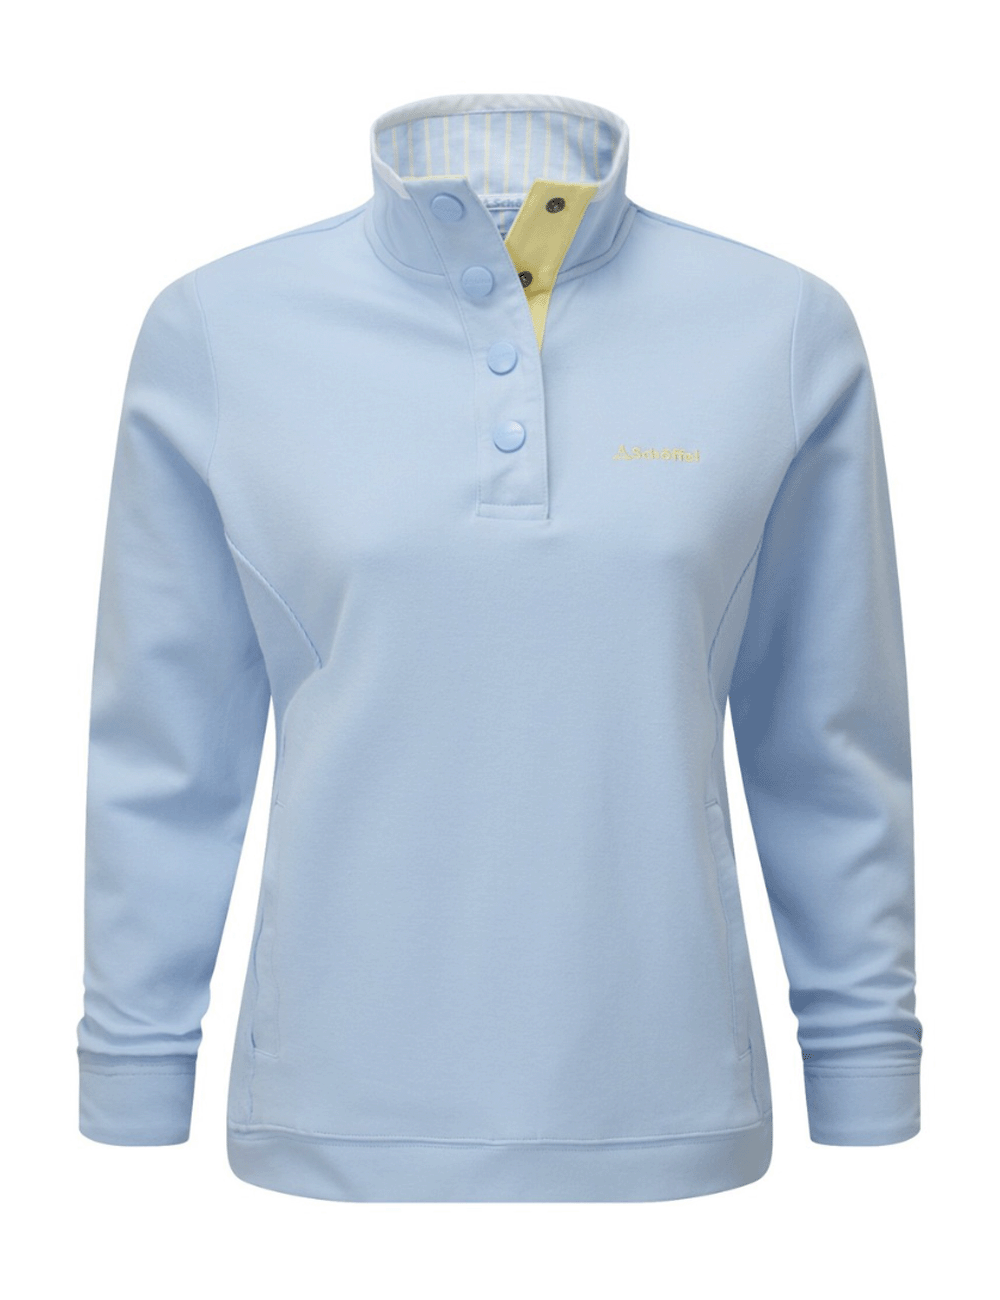 Schoffel's Steephill Cove Sweatshirt in Pale Blue on a white background